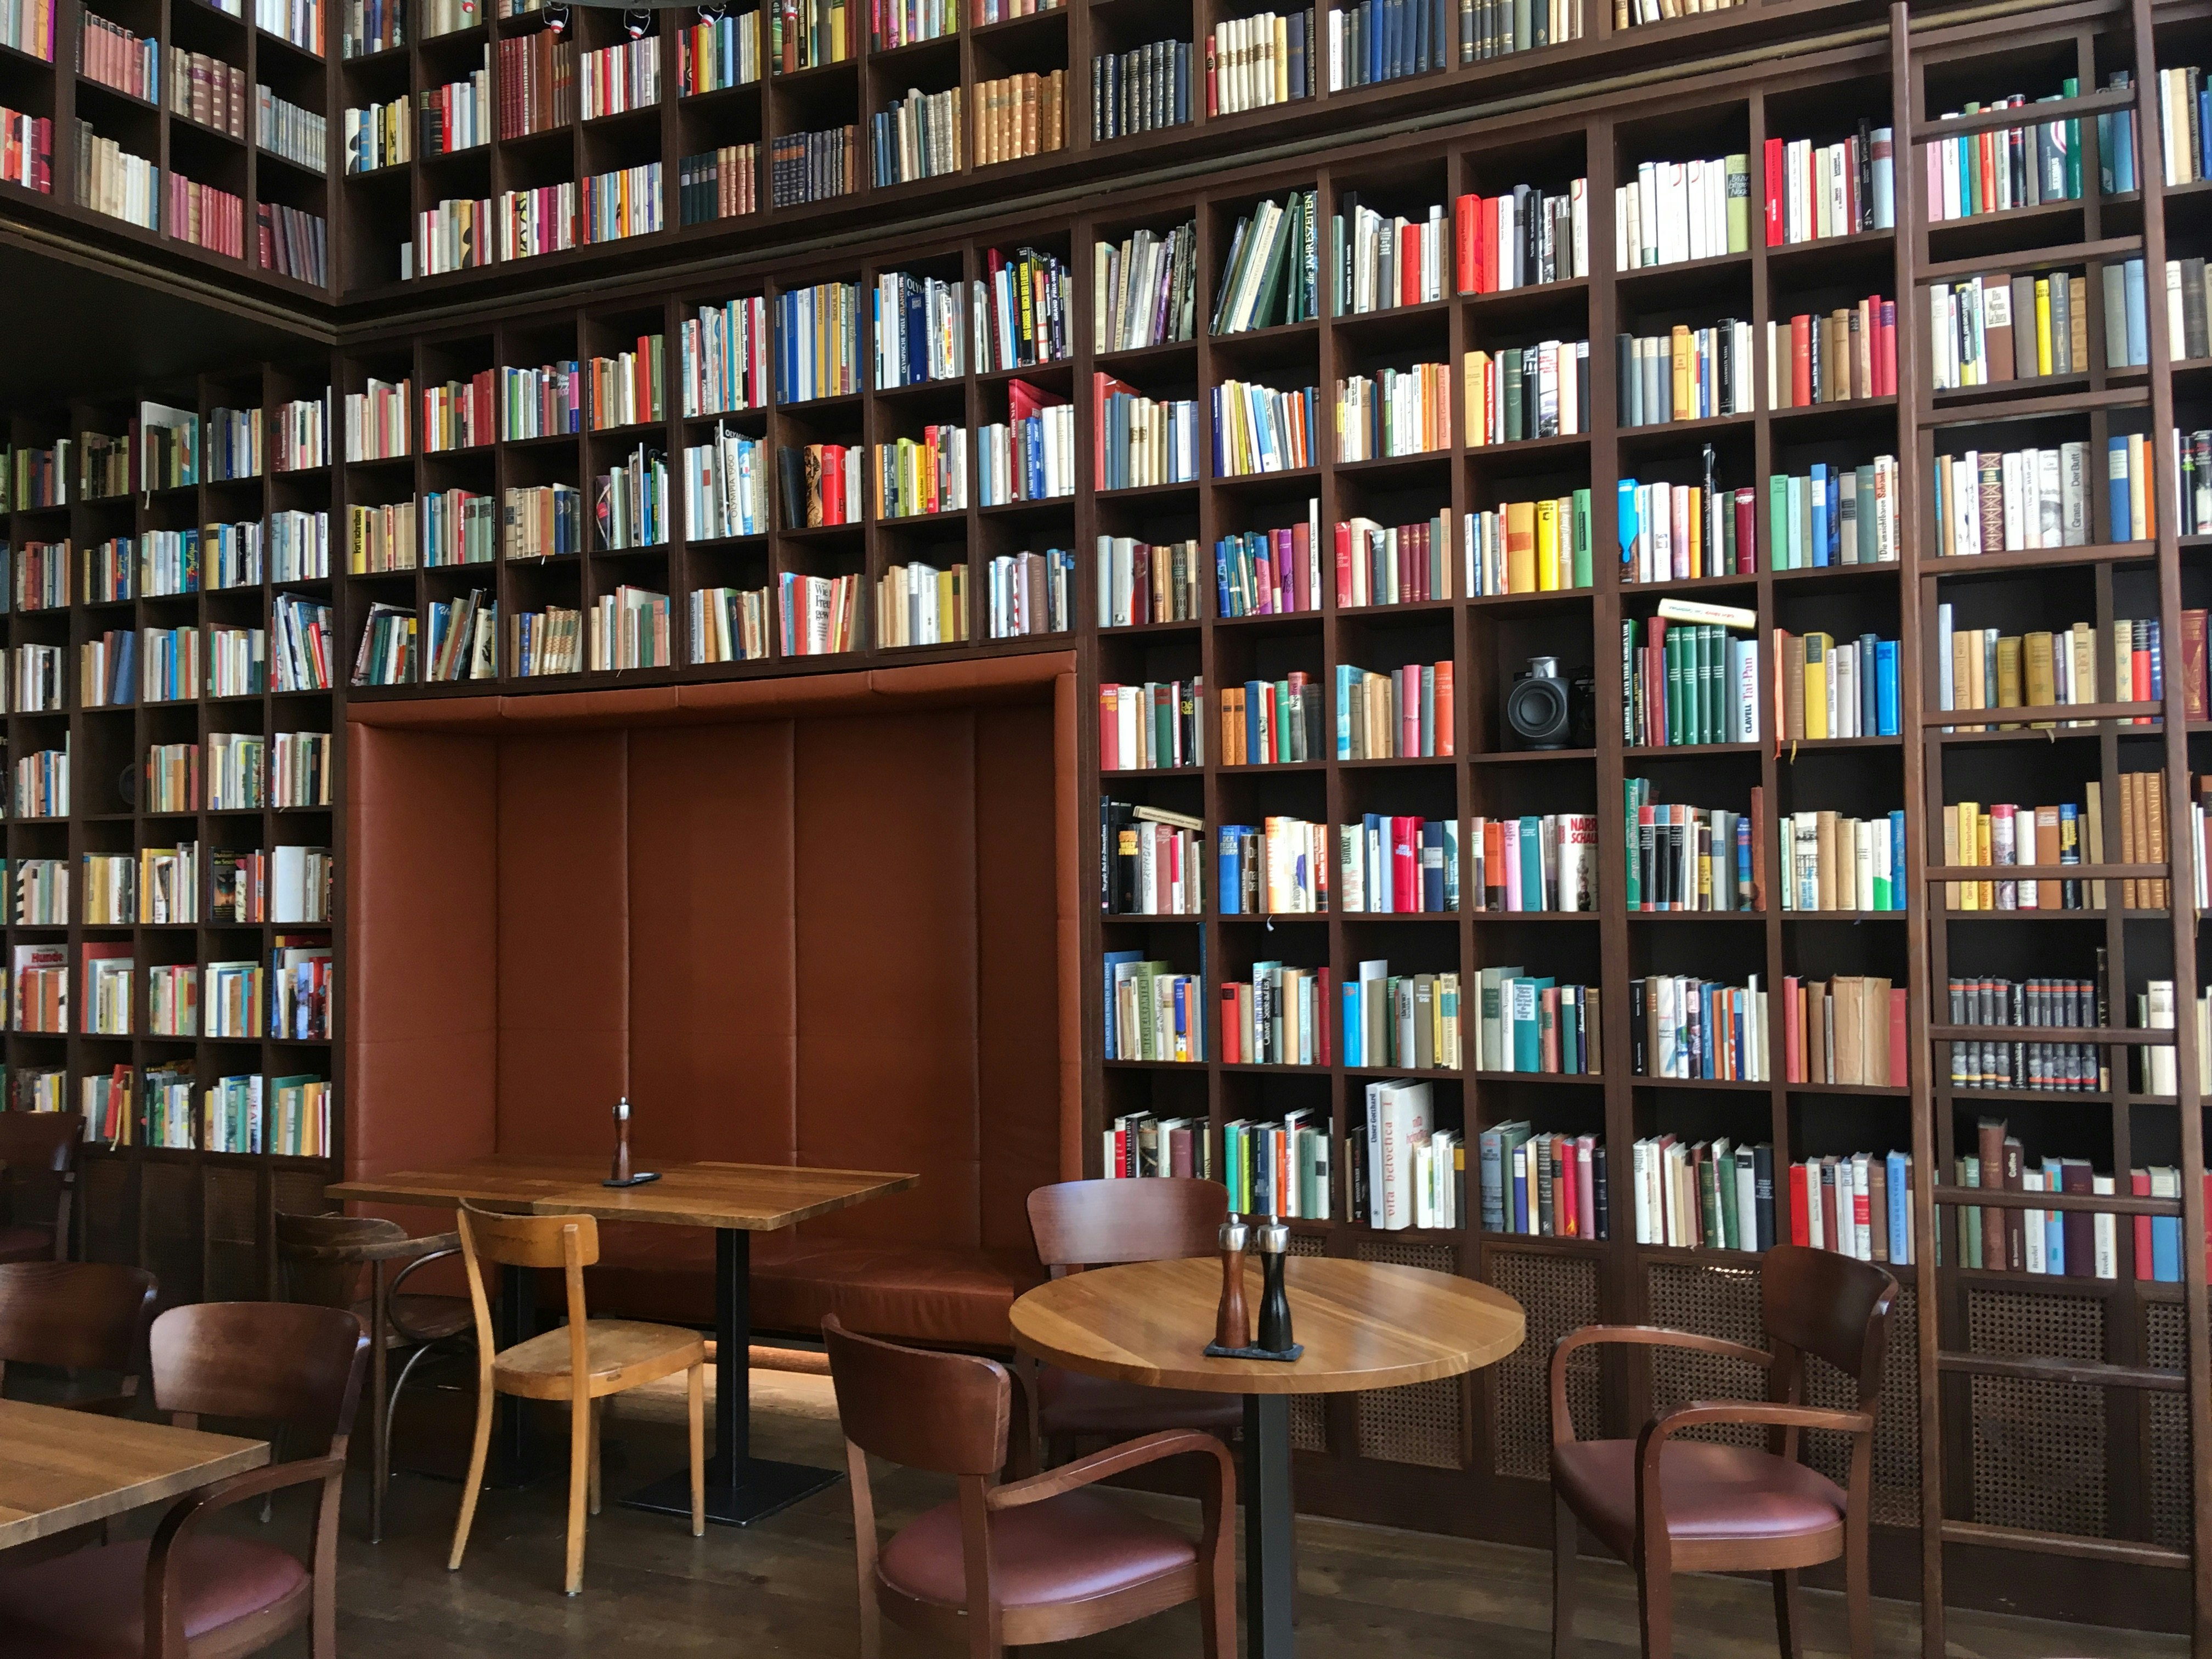 The interior of B2's wine library: the high walls are covered with rows and rows of dark wood bookshelves, with a seating alcove built into them at ground level; there are further wooden tables and chairs in the centre of the room.